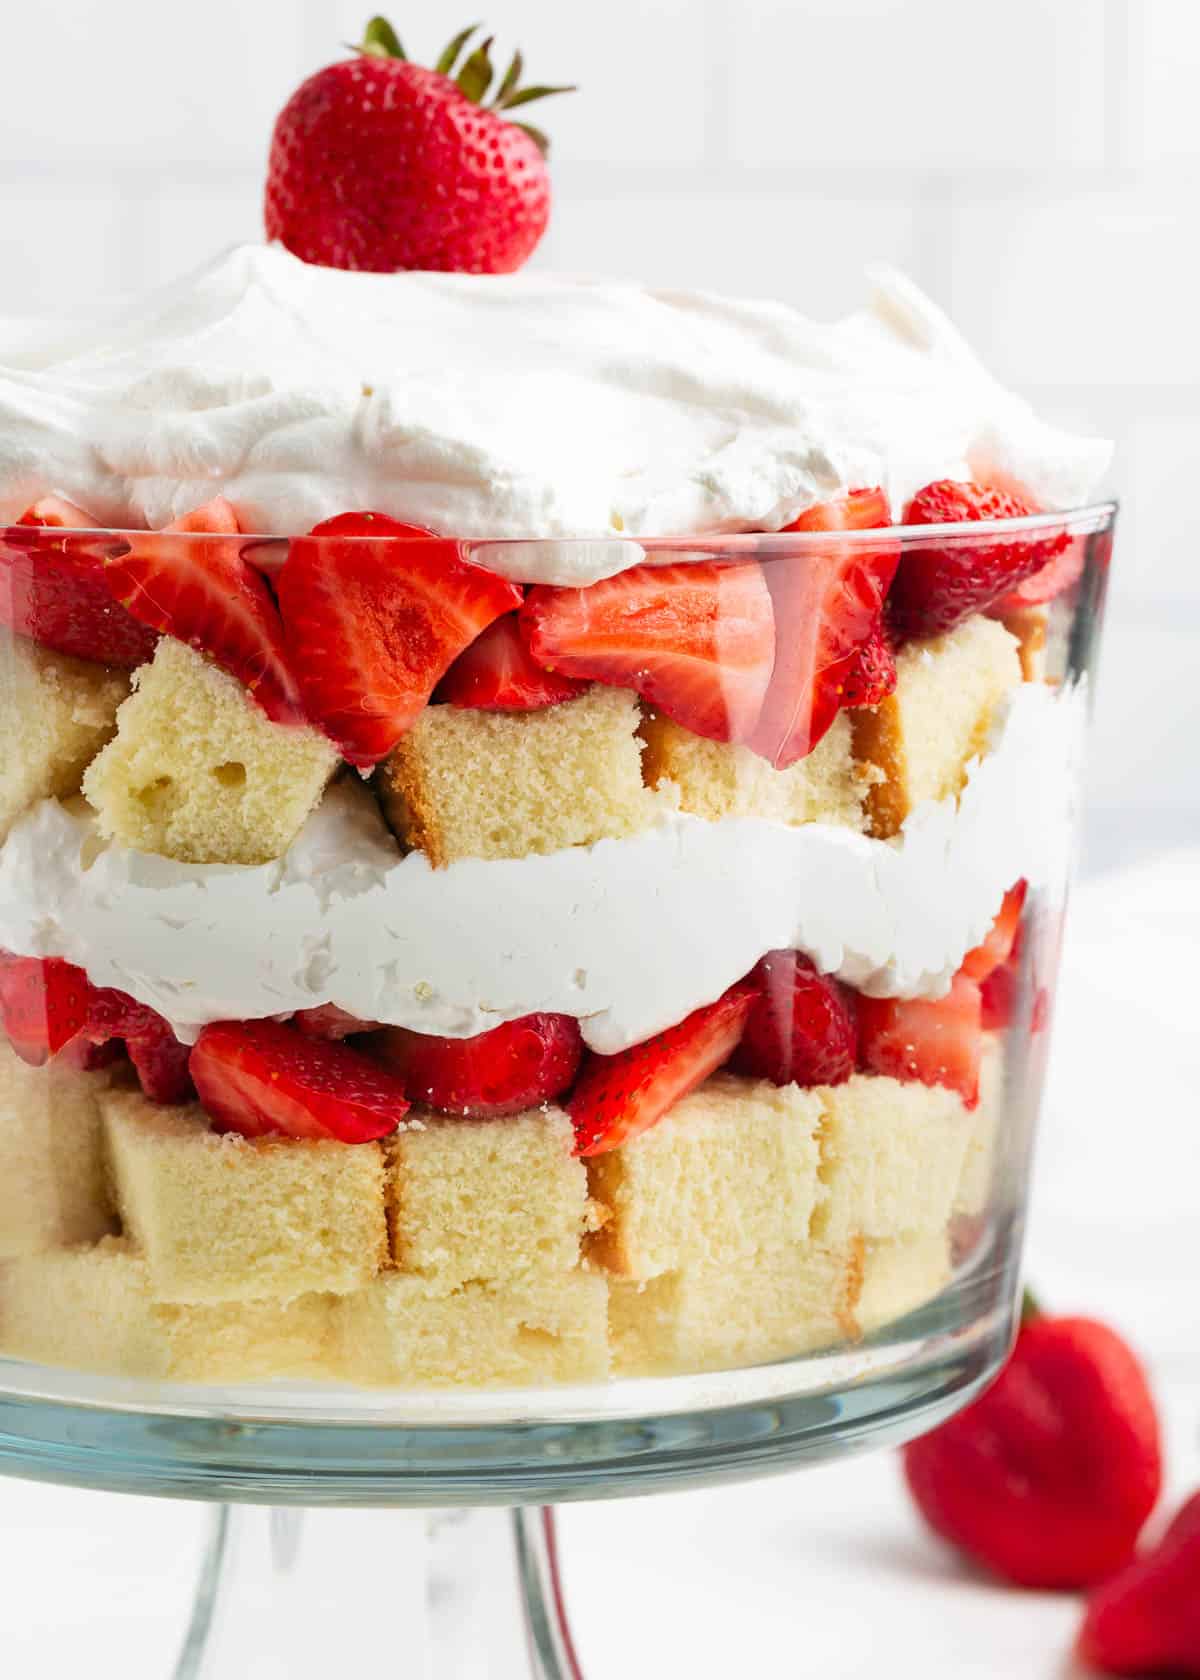 Strawberry shortcake trifle layered in a trifle dish with pound cake, cream and sliced strawberries.